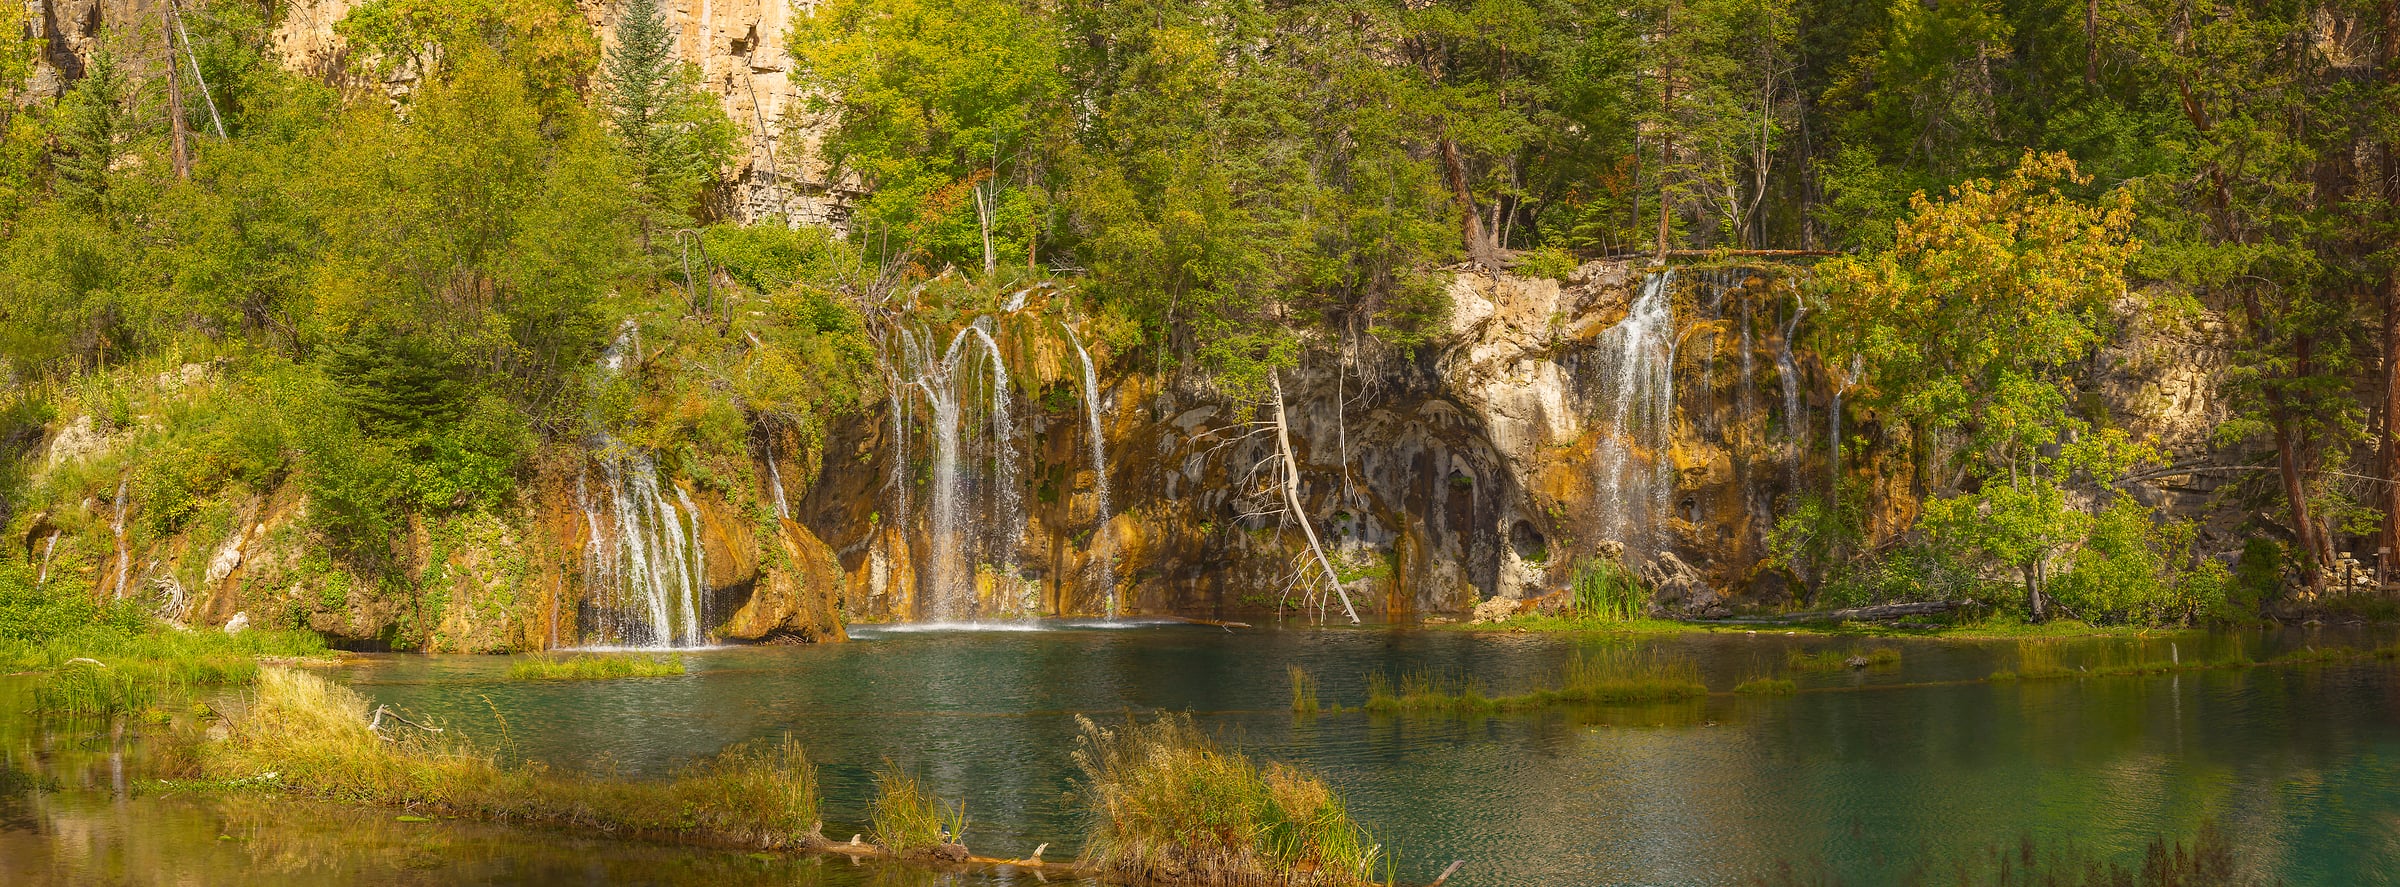 3,779 megapixels! A very high resolution, large-format VAST photo print of a lake with waterfalls and trees; gigapixel wallpaper photograph created by John Freeman in Hanging Lake, Glenwood Canyon, Colorado.